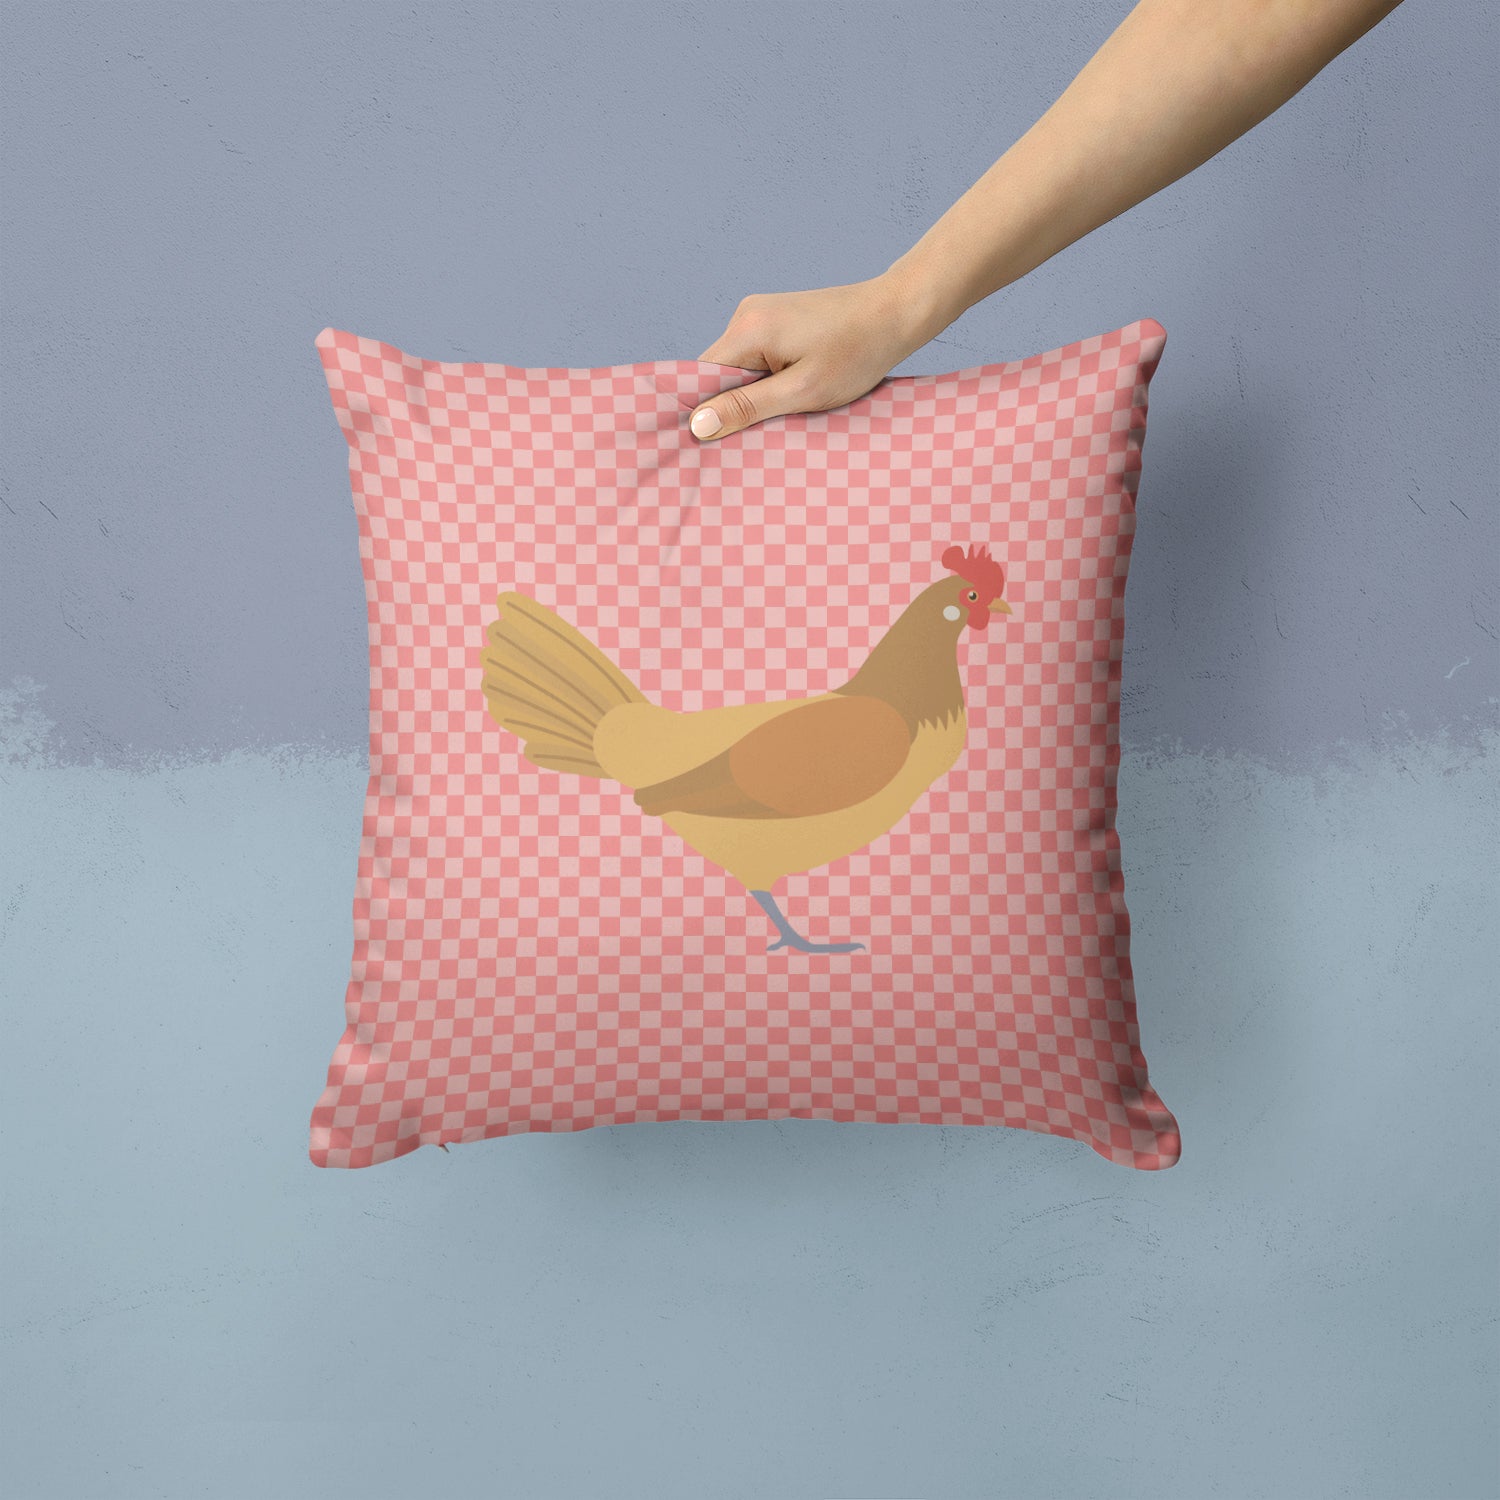 Frisian Friesian Chicken Pink Check Fabric Decorative Pillow BB7832PW1414 - the-store.com